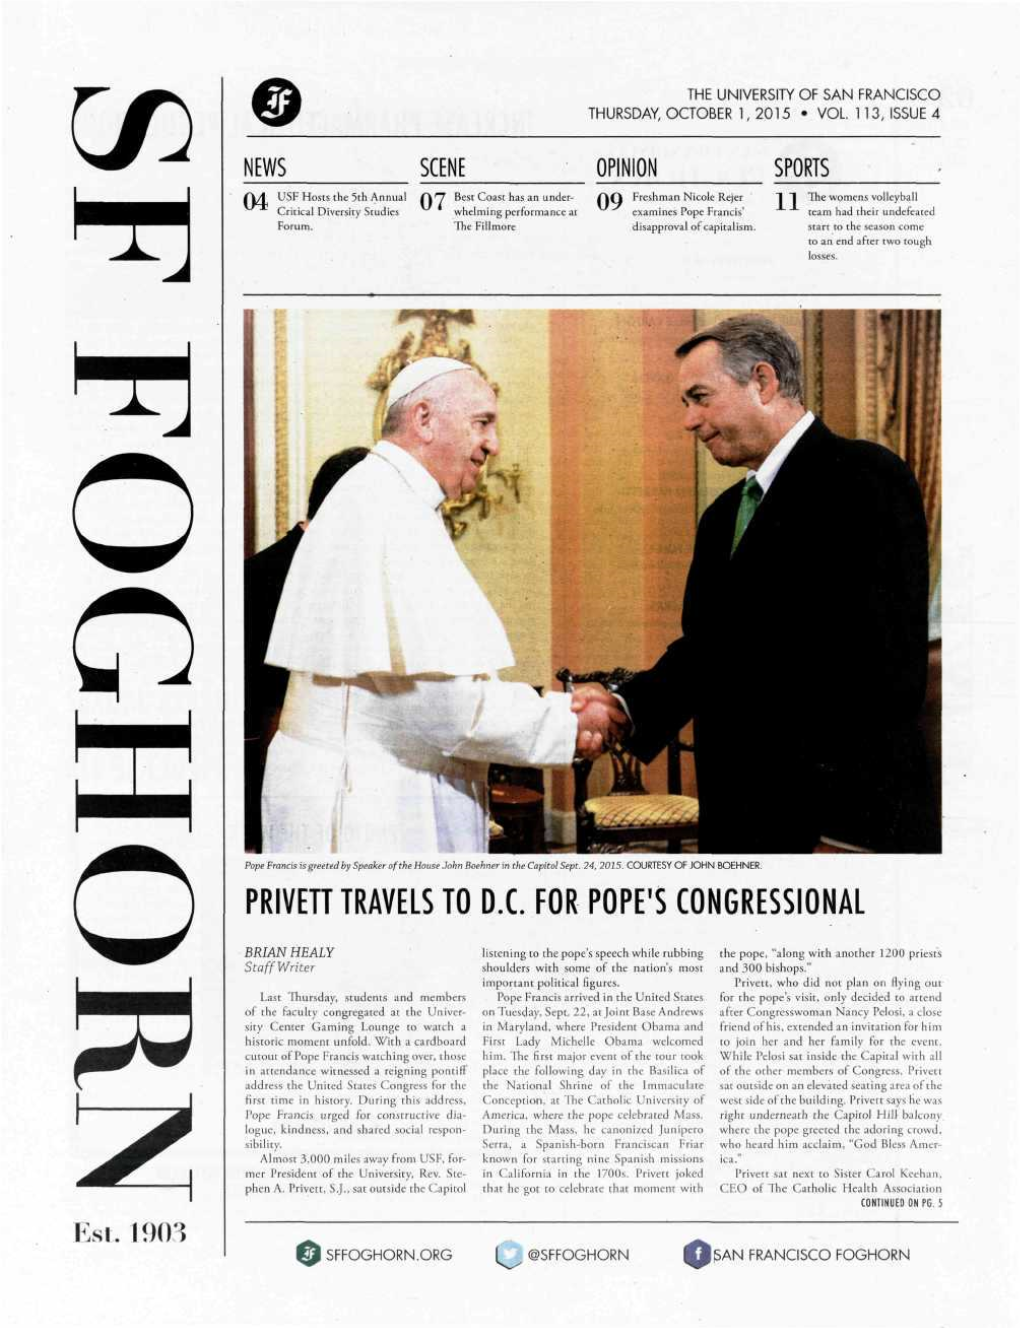 Privett Travels to D.C. for Pope's Congressional